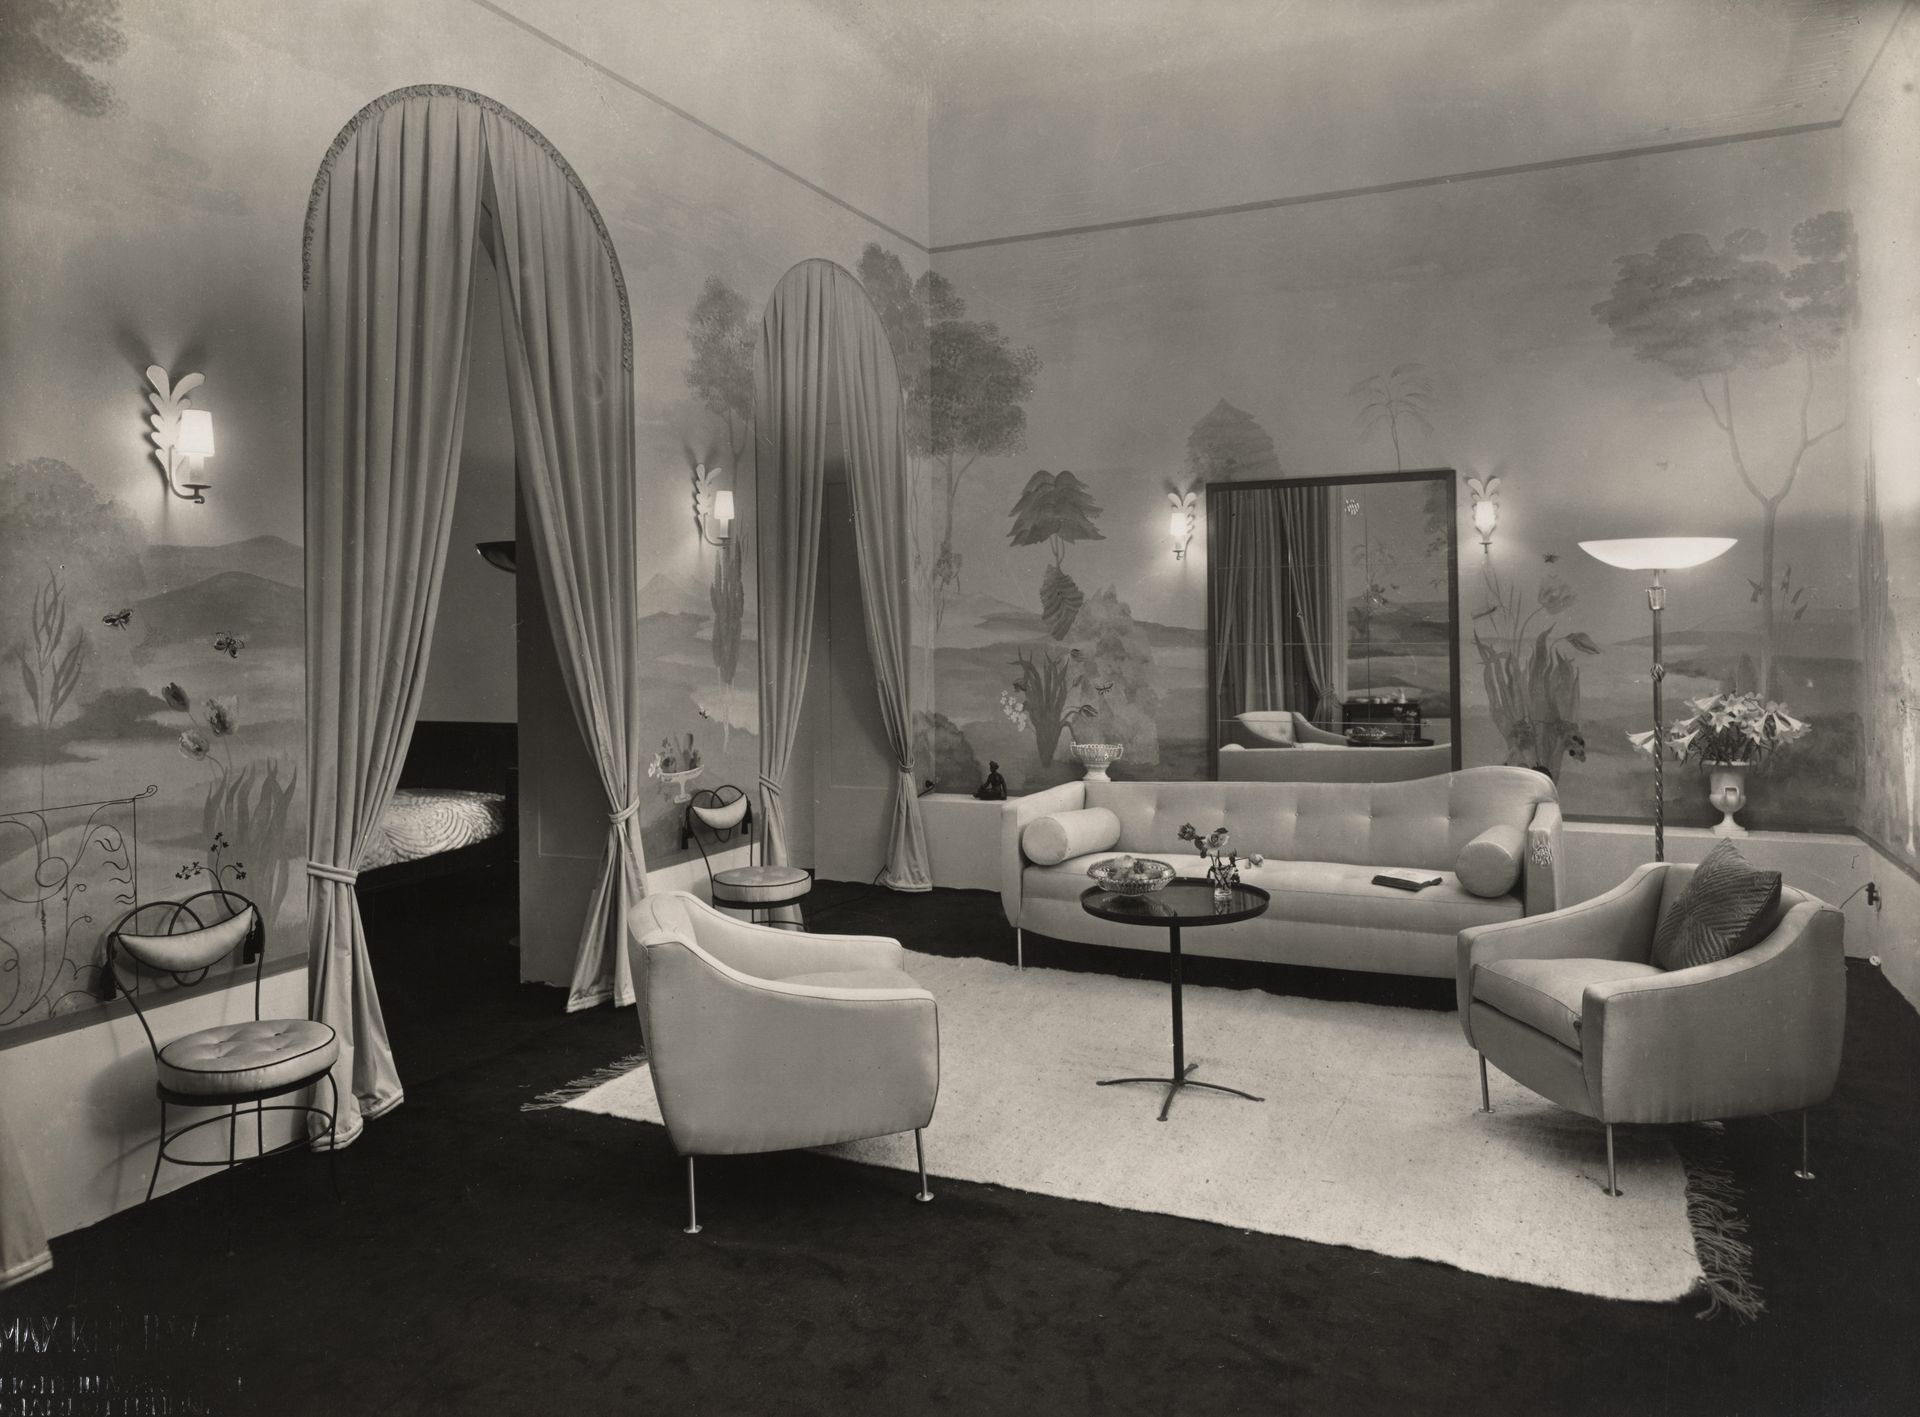 Max Krajewsky, Woman's living room with view at the bedroom by Ruth Hildegard Geyer-Raack, exhibition in the furnishing house "Meisterräume" Berlin, c. 1936